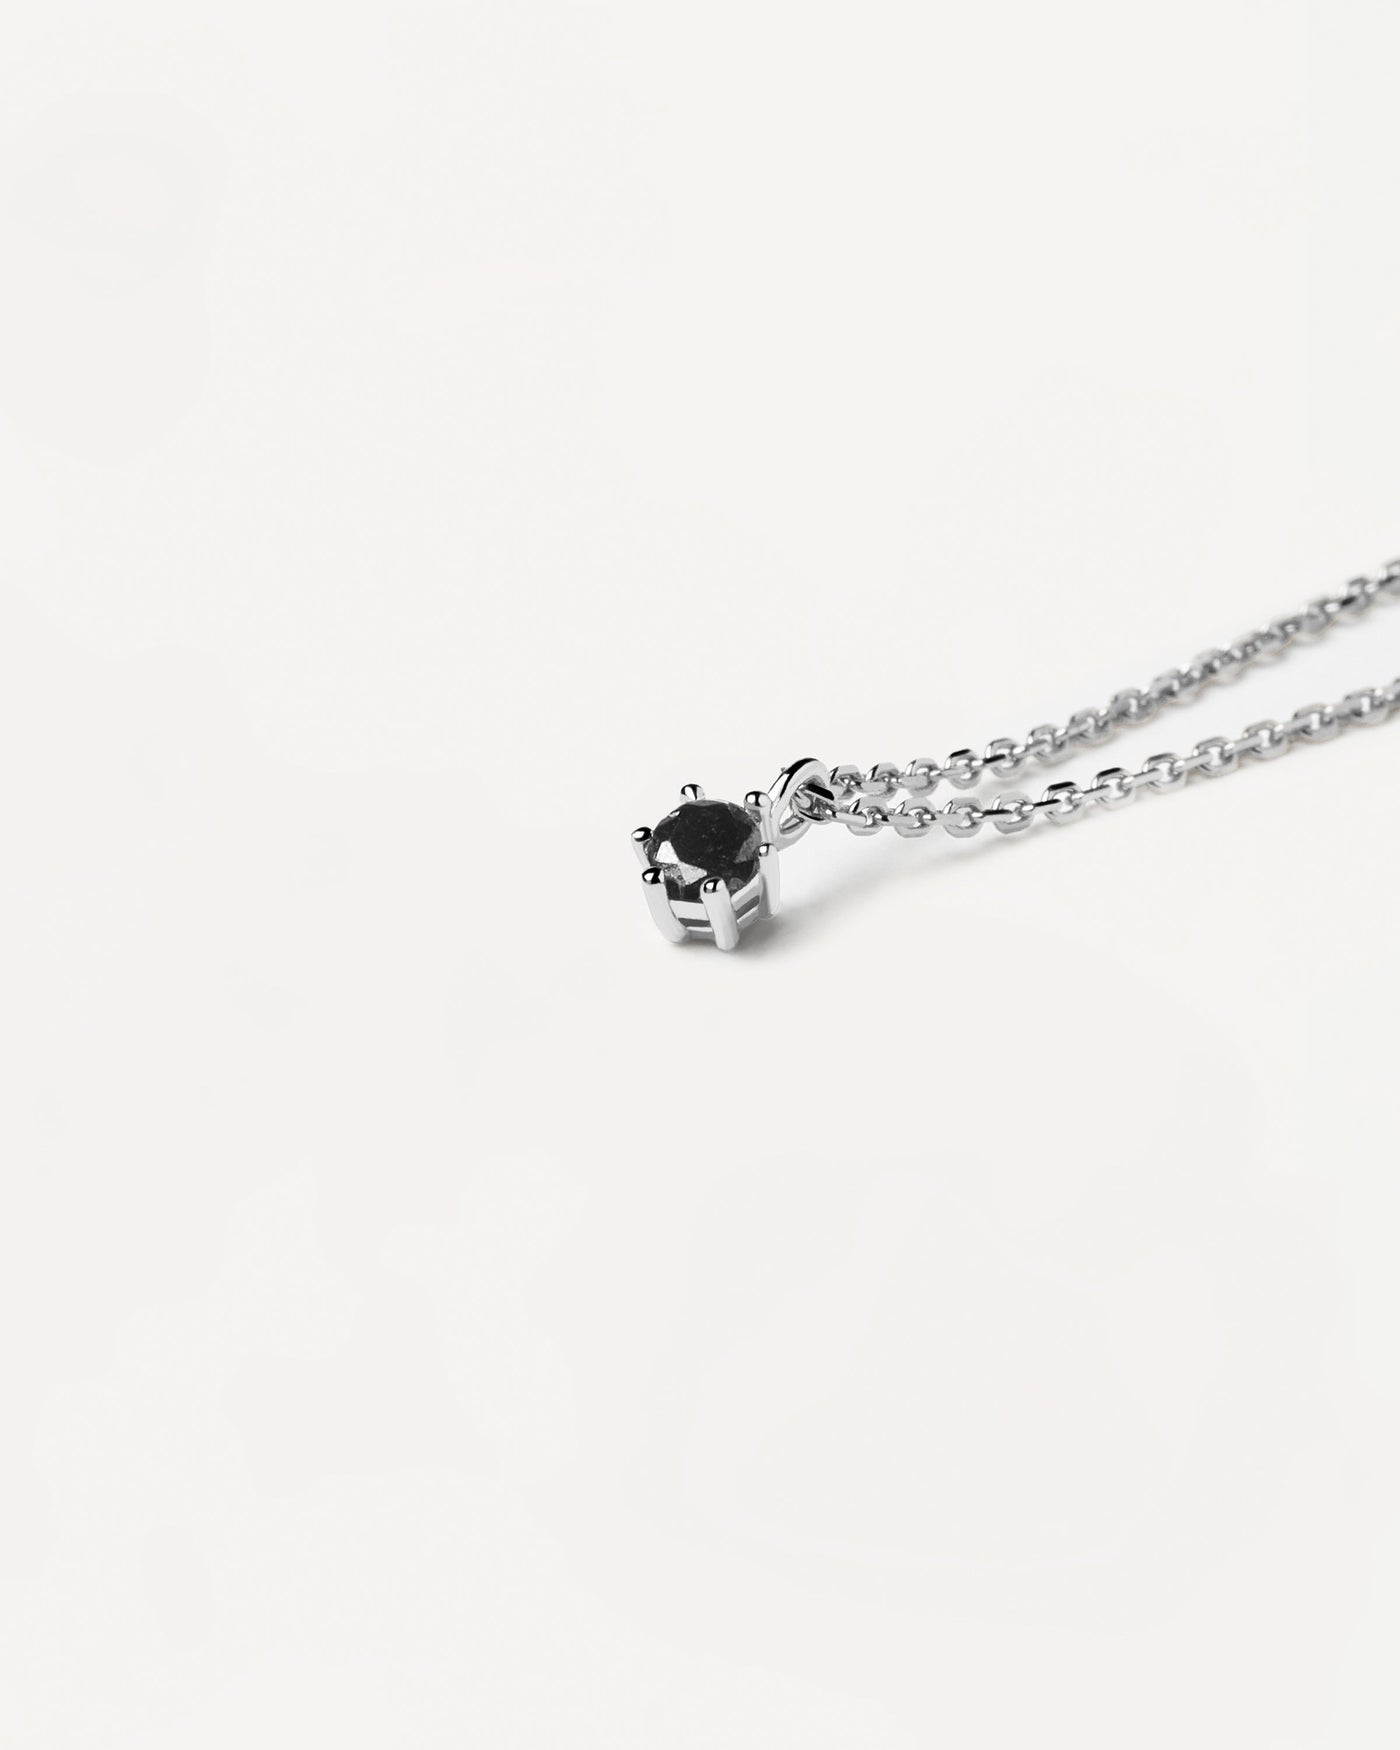 2023 Selection | Black Solitary Necklace Silver. Single link necklace in sterling silver with a black zirconia on prongs. Get the latest arrival from PDPAOLA. Place your order safely and get this Best Seller. Free Shipping.